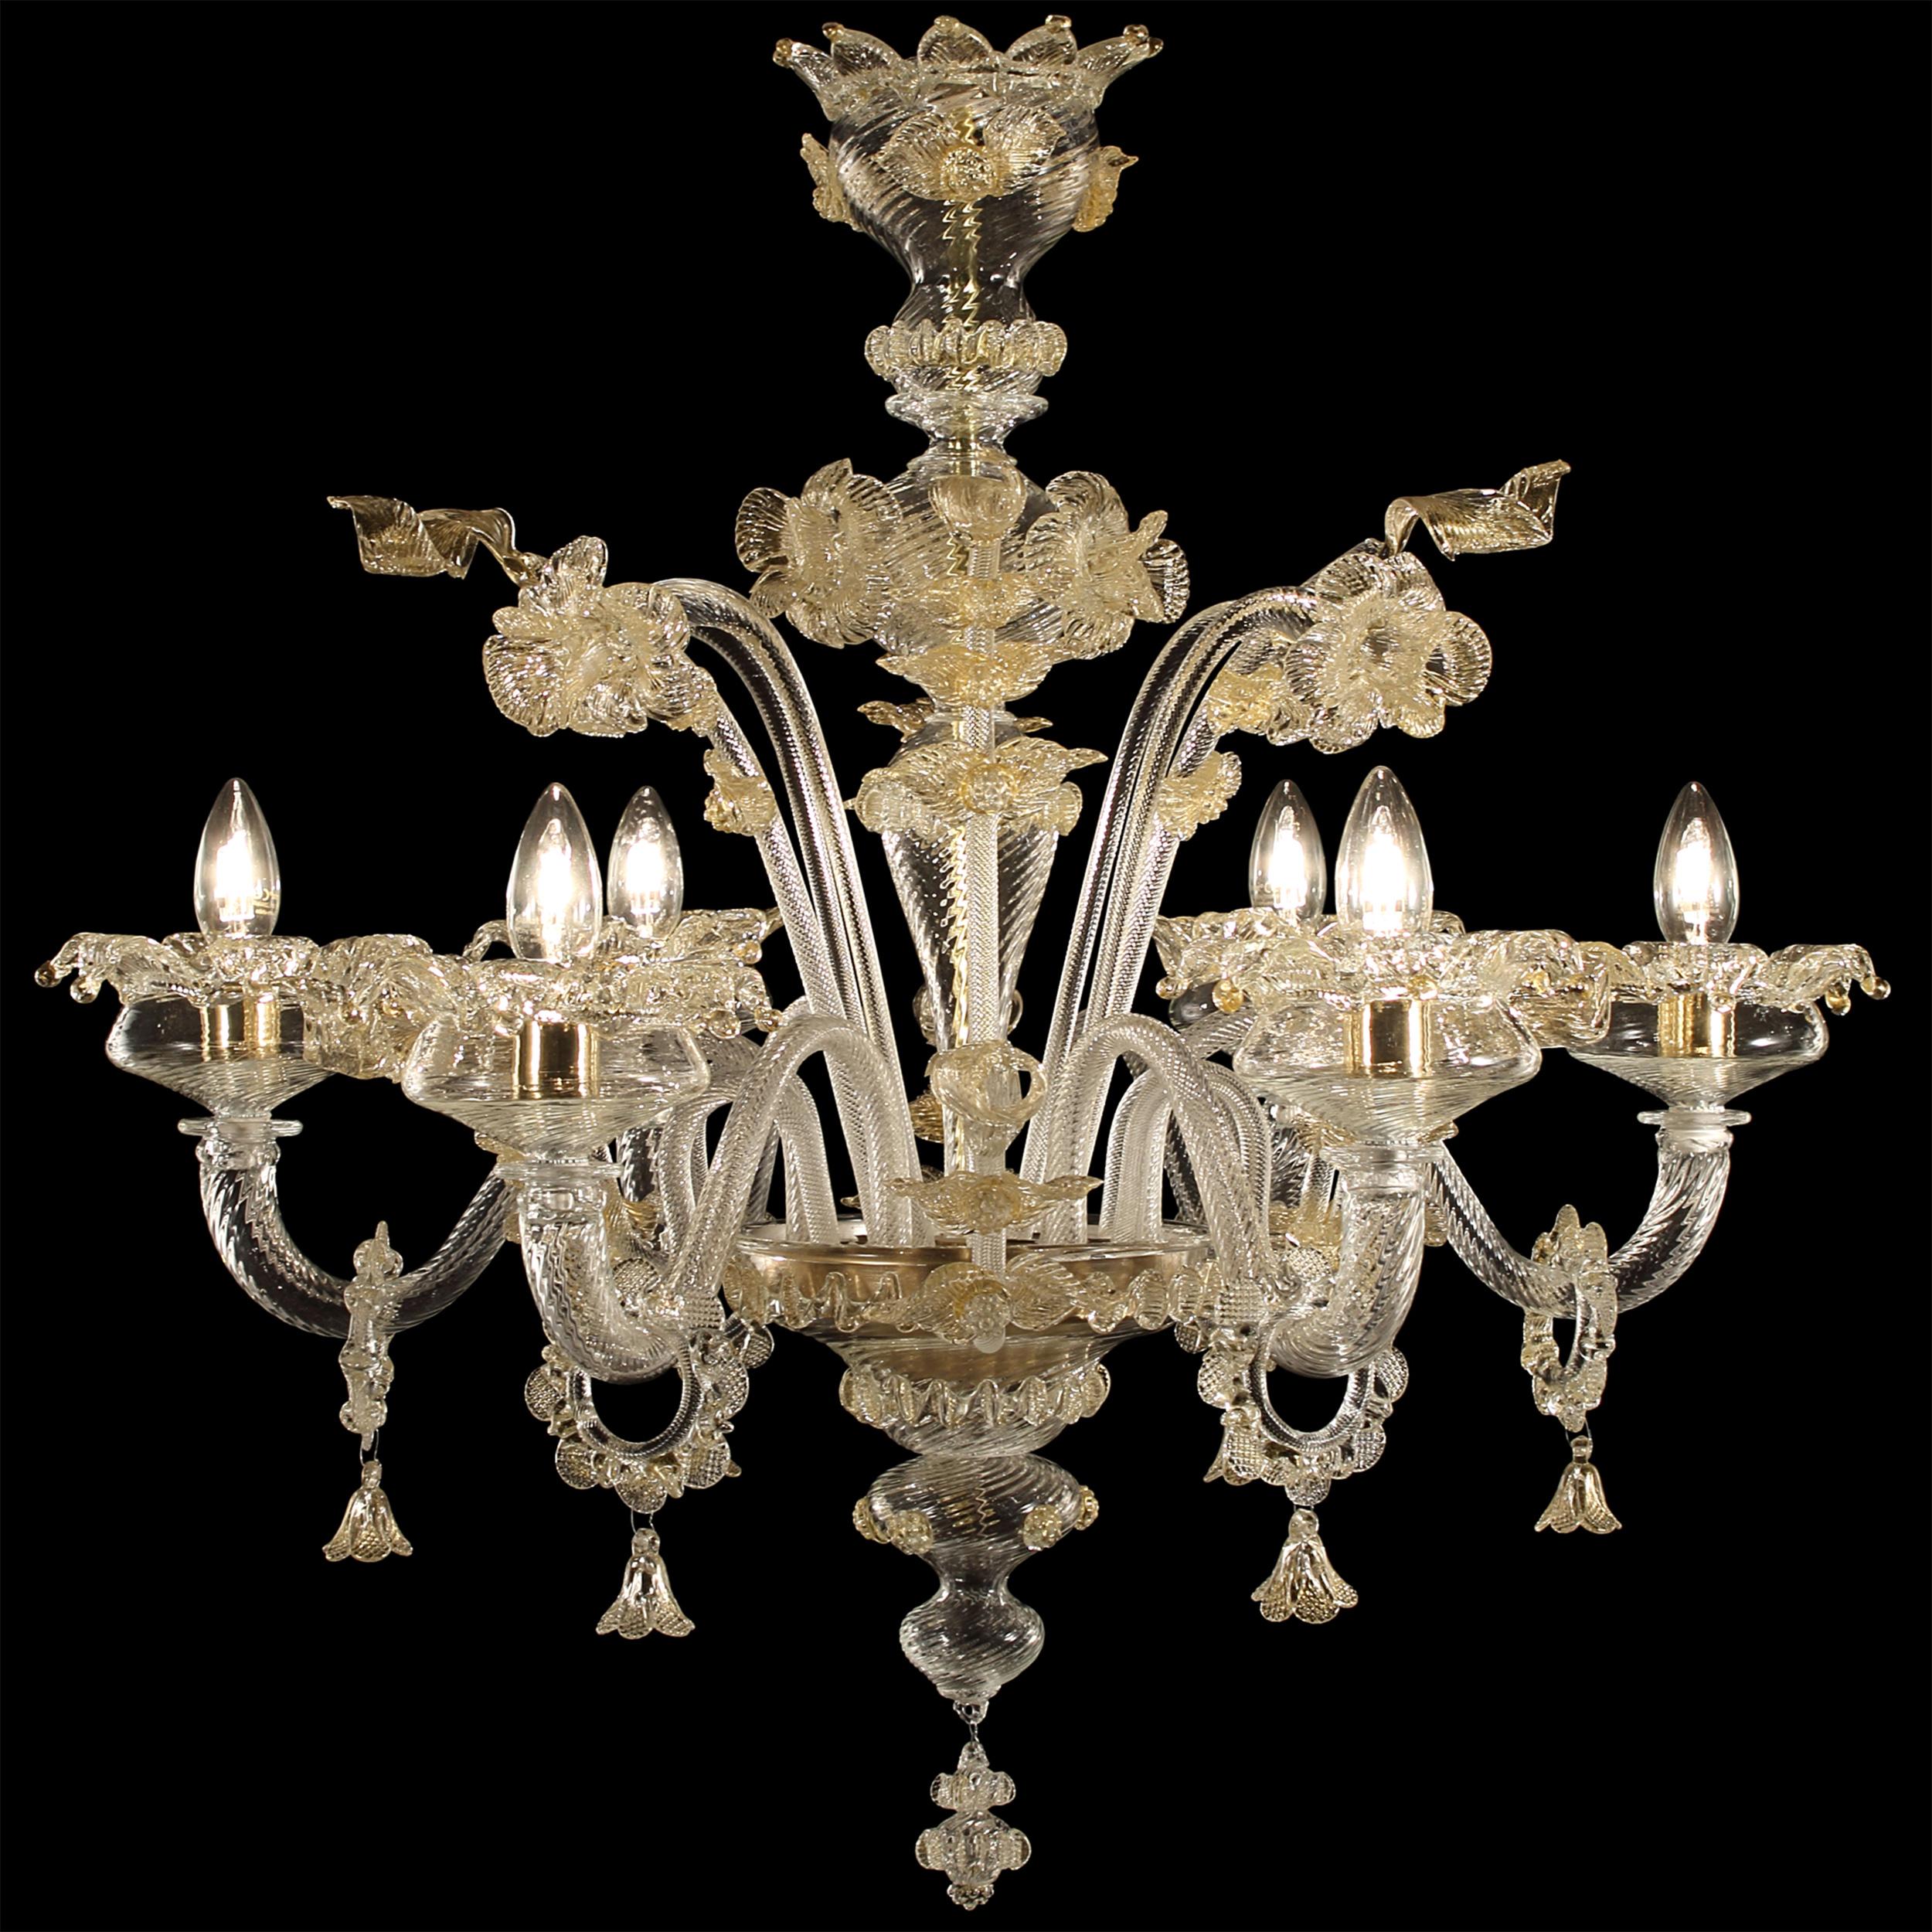 Rich chandelier 6 Arms crystal and gold Murano glass Fenix by Multiforme.
The blown glass chandelier Fenix, with its floral style, harks back to the venetian classic tradition. The decorative elements are characterized by flowers modelled petal by